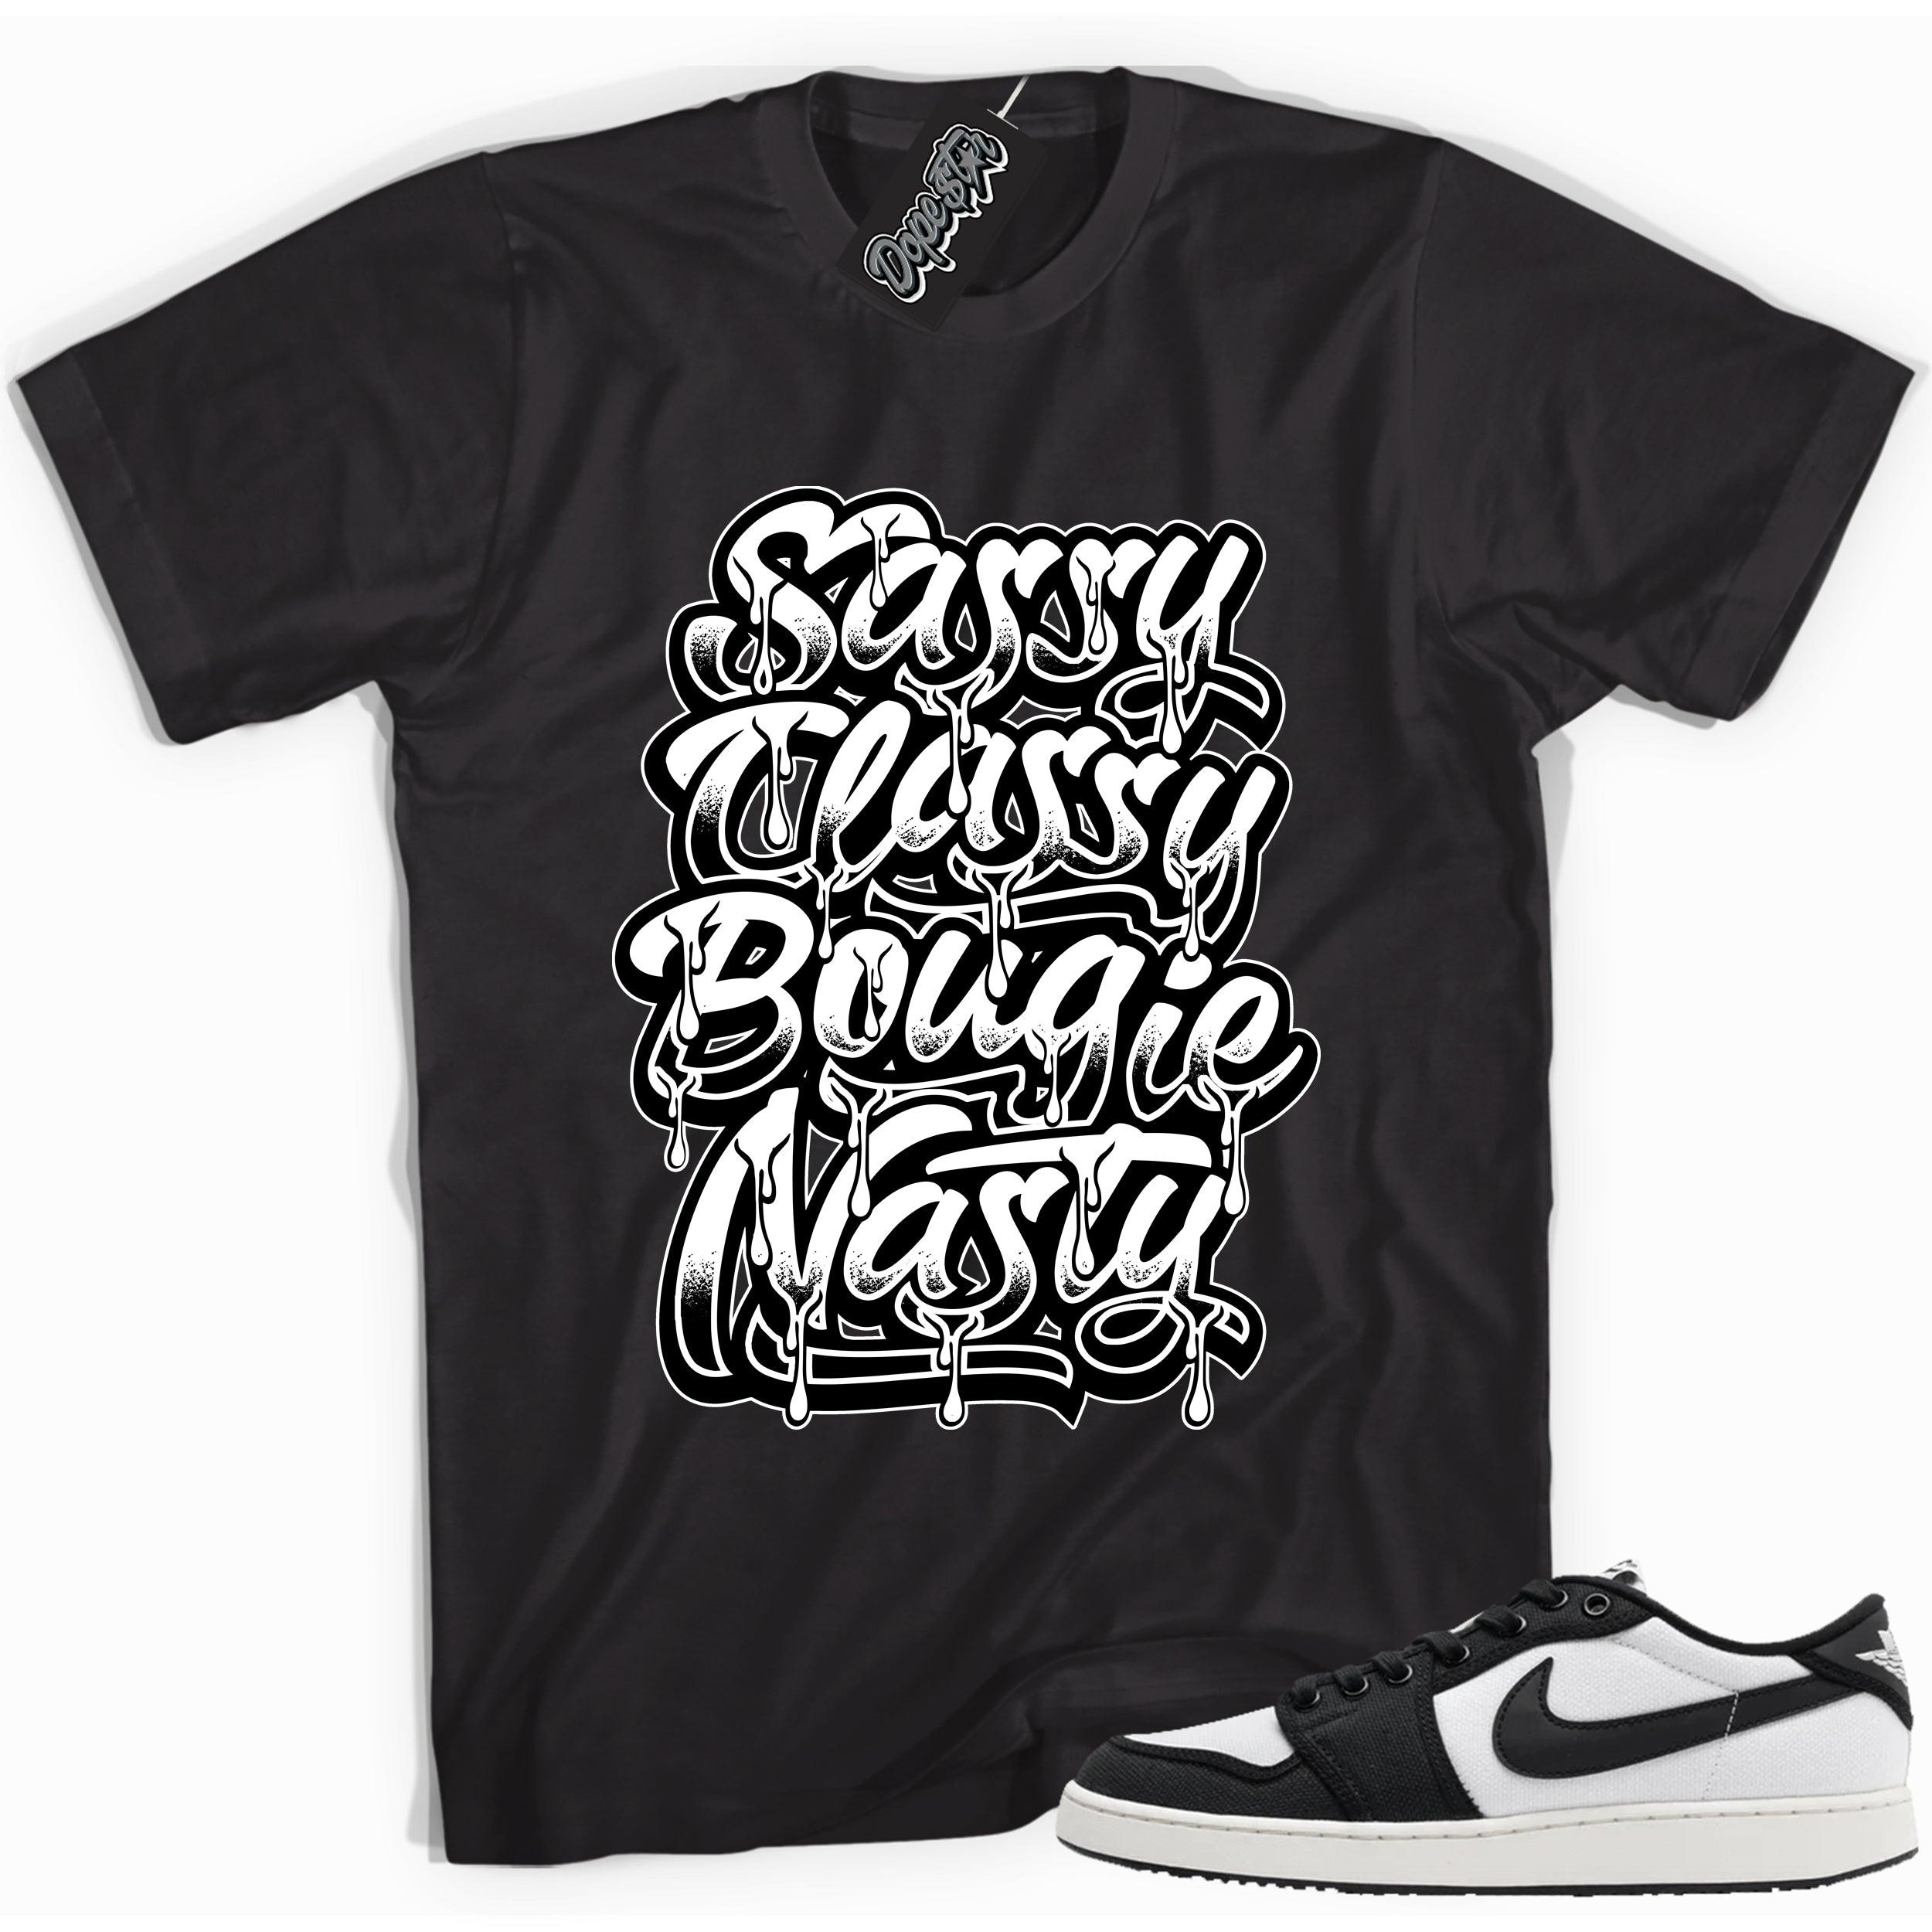 Cool black graphic tee with 'sassy classy' print, that perfectly matches Air Jordan 1 Retro Ajko Low Black & White sneakers.